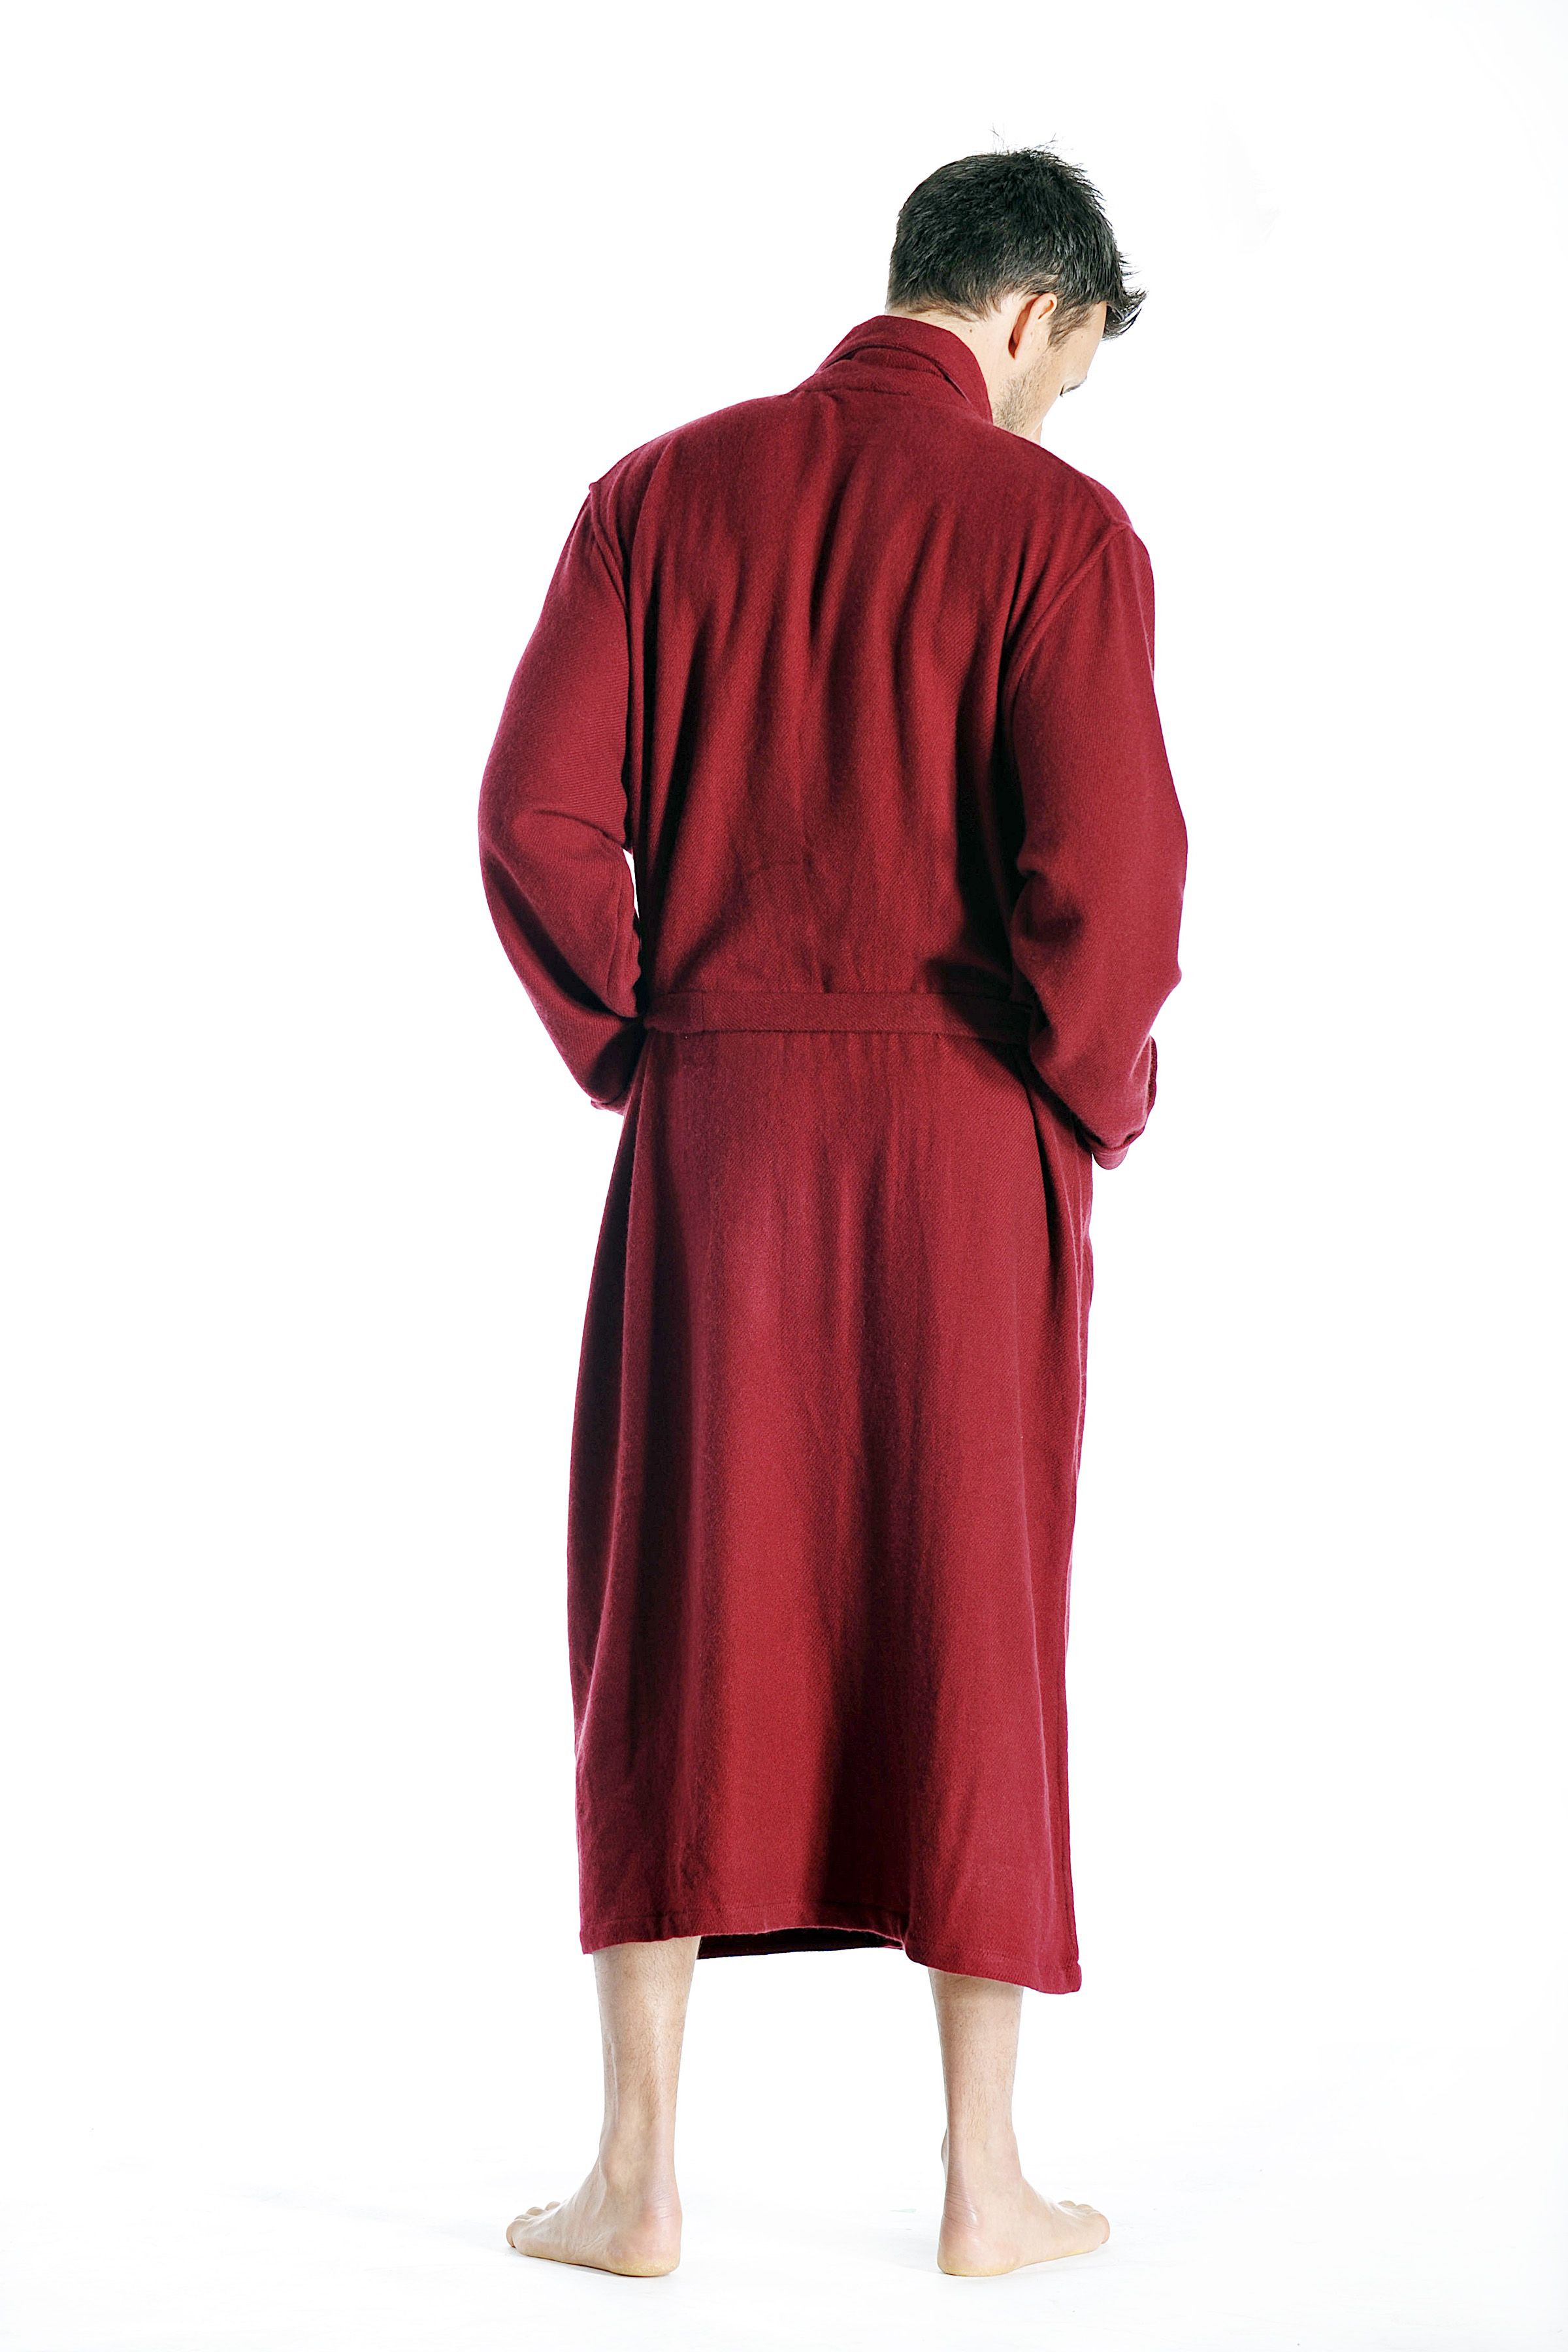 Pure Cashmere Full Length Robe for Men (Burgundy, Large/Extra Large)